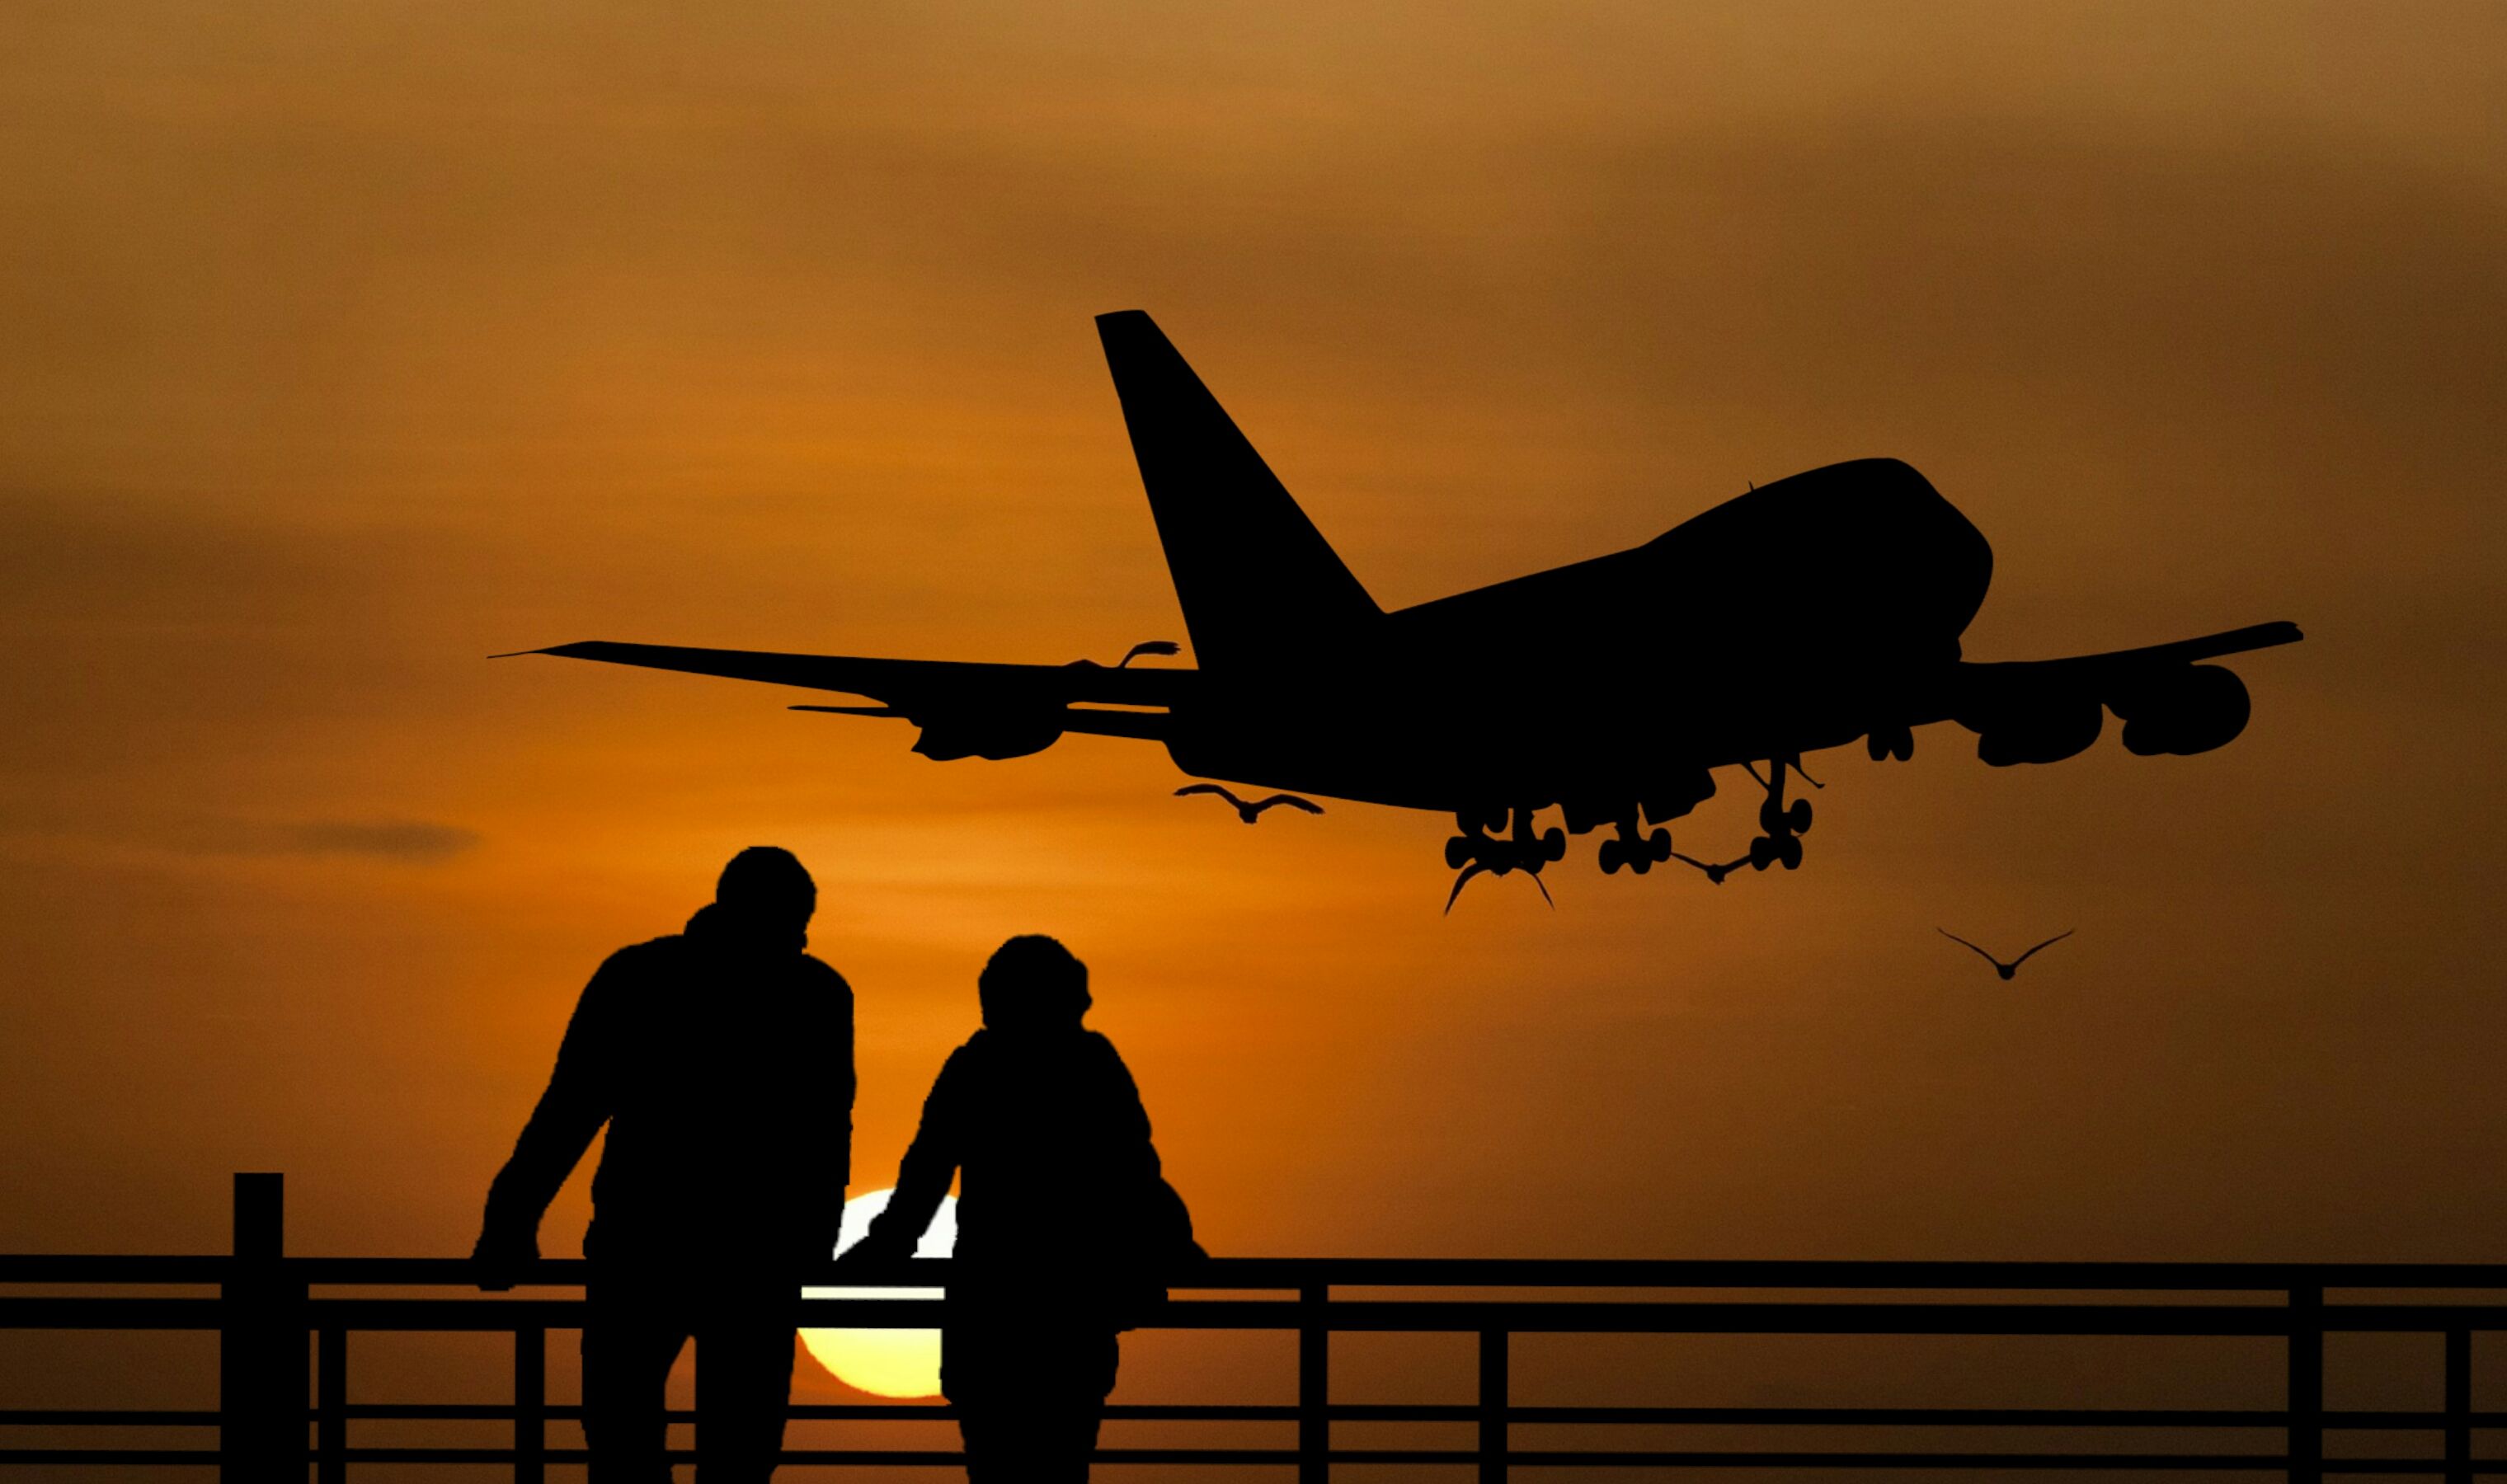 Two people look over a railing, during sunset, at a Boeing 747 taking off.